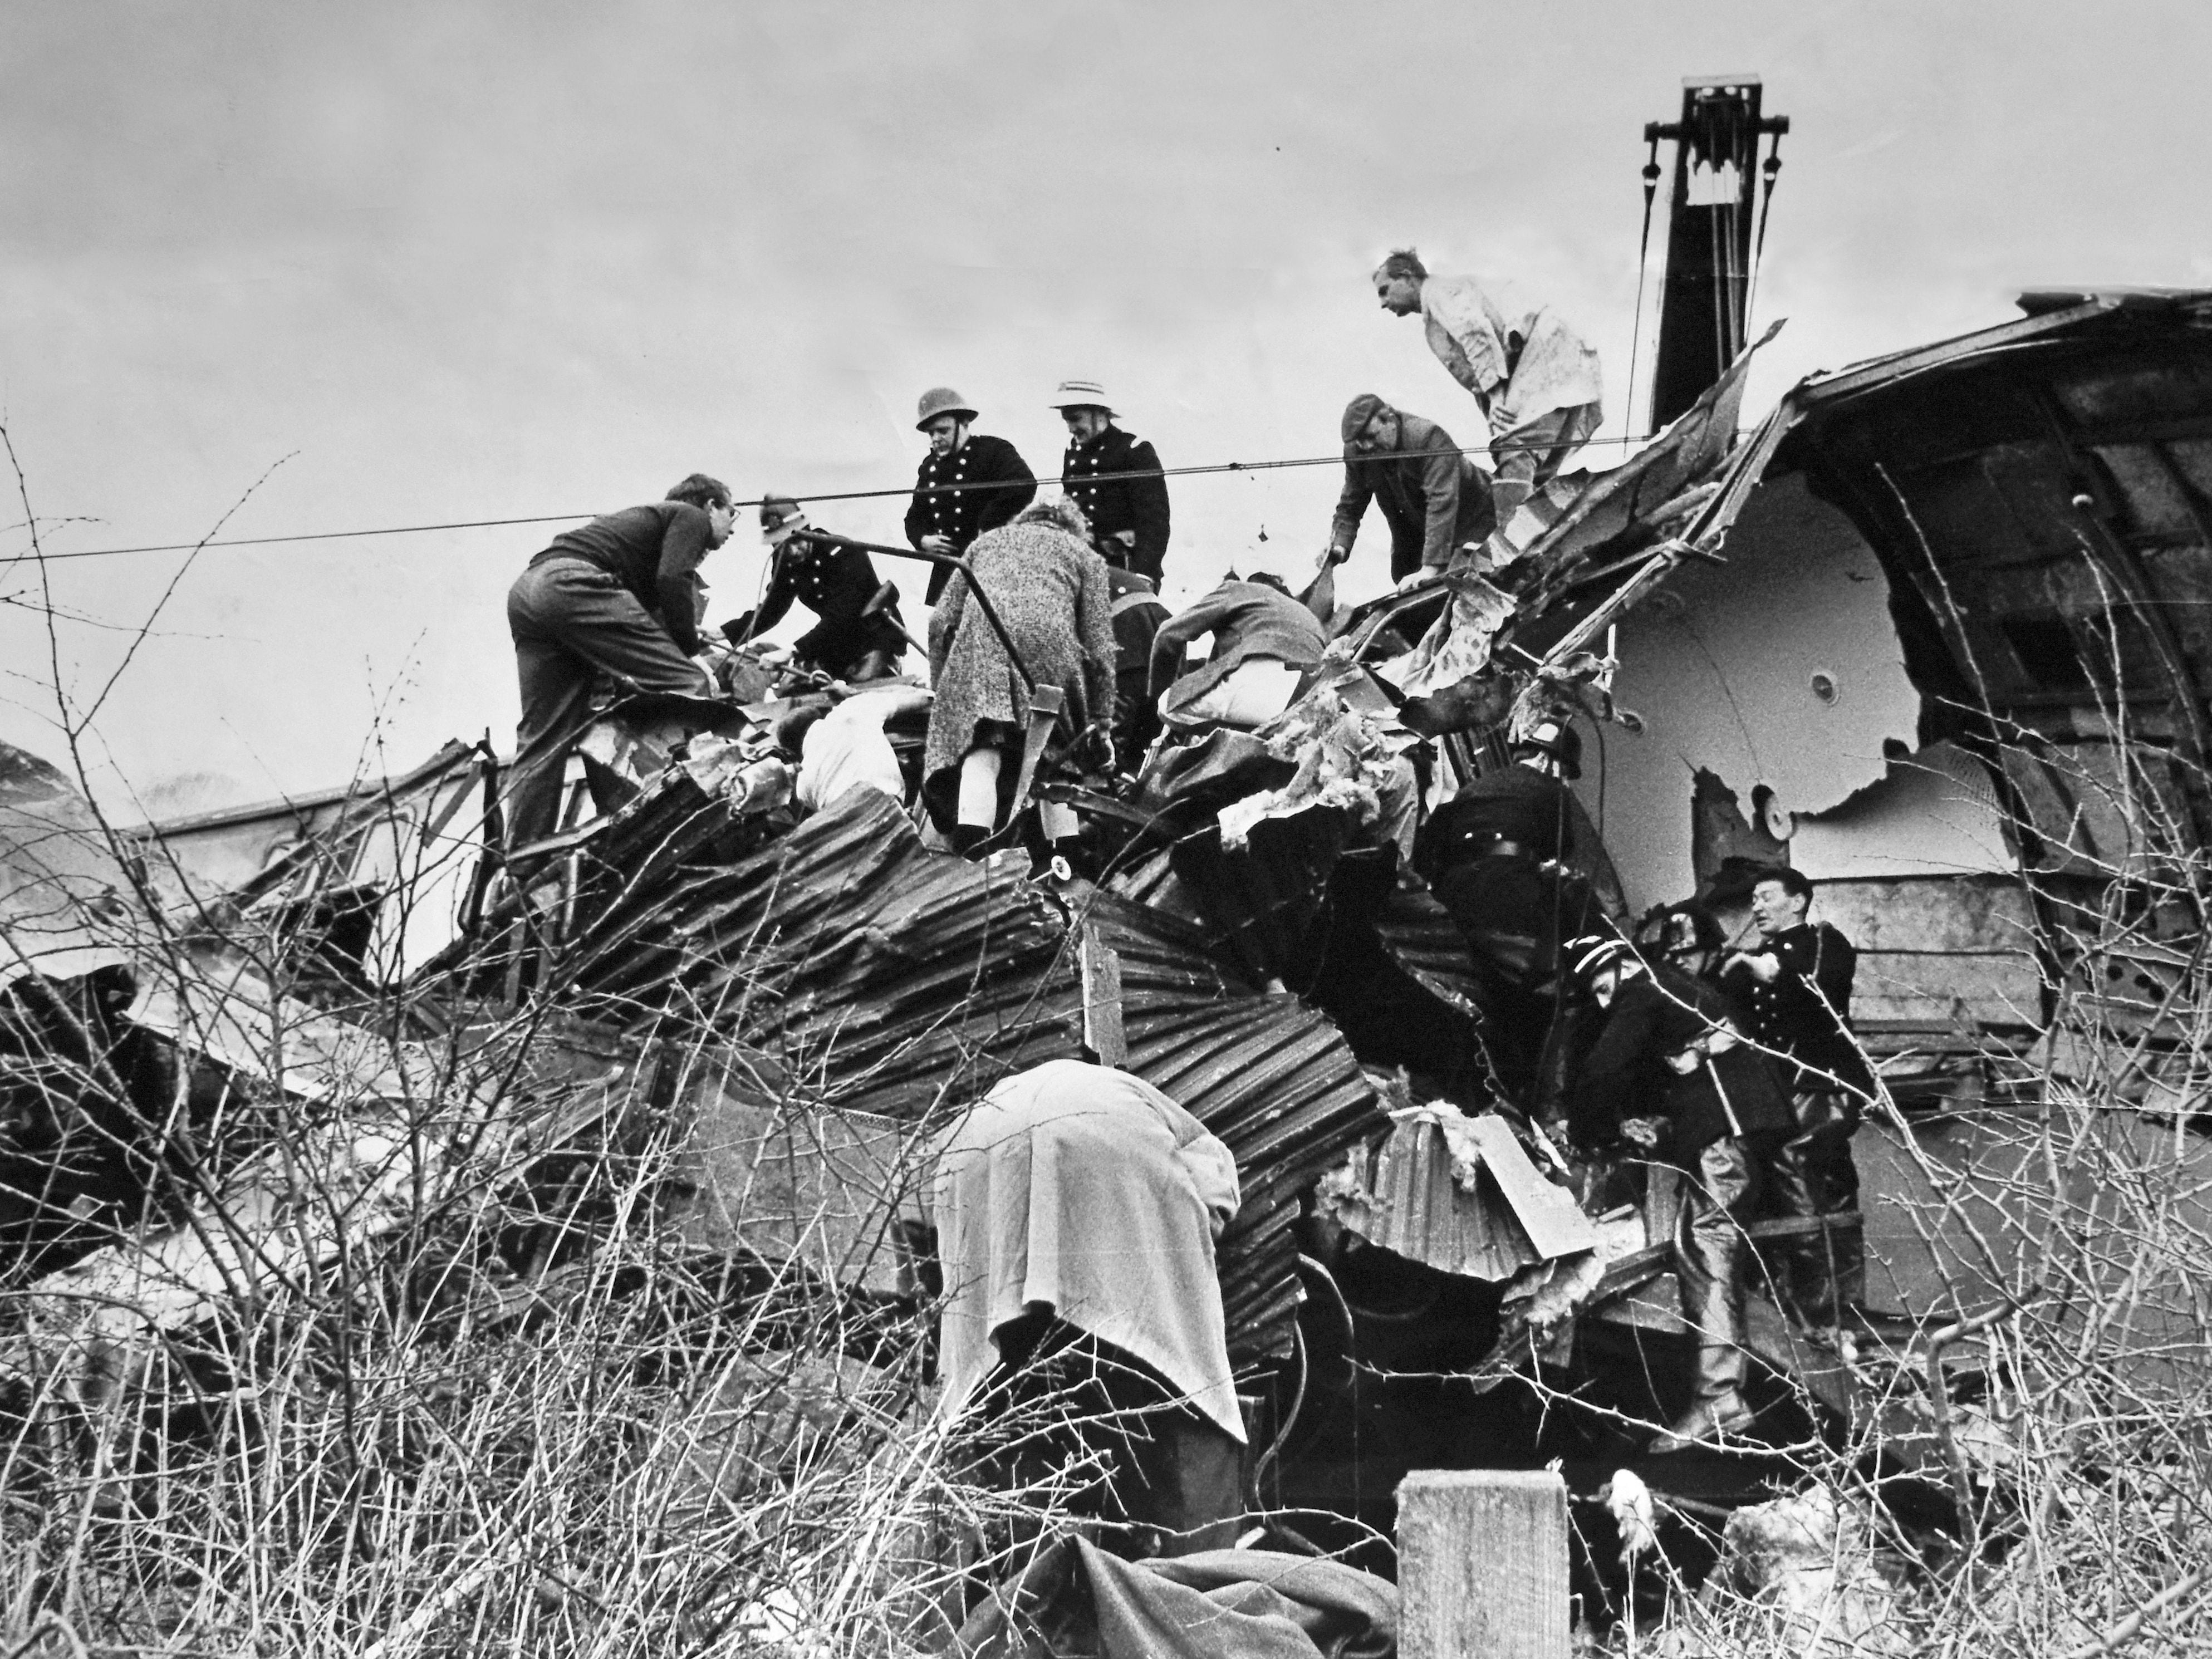 Community to come together to remember those lost in rail disaster